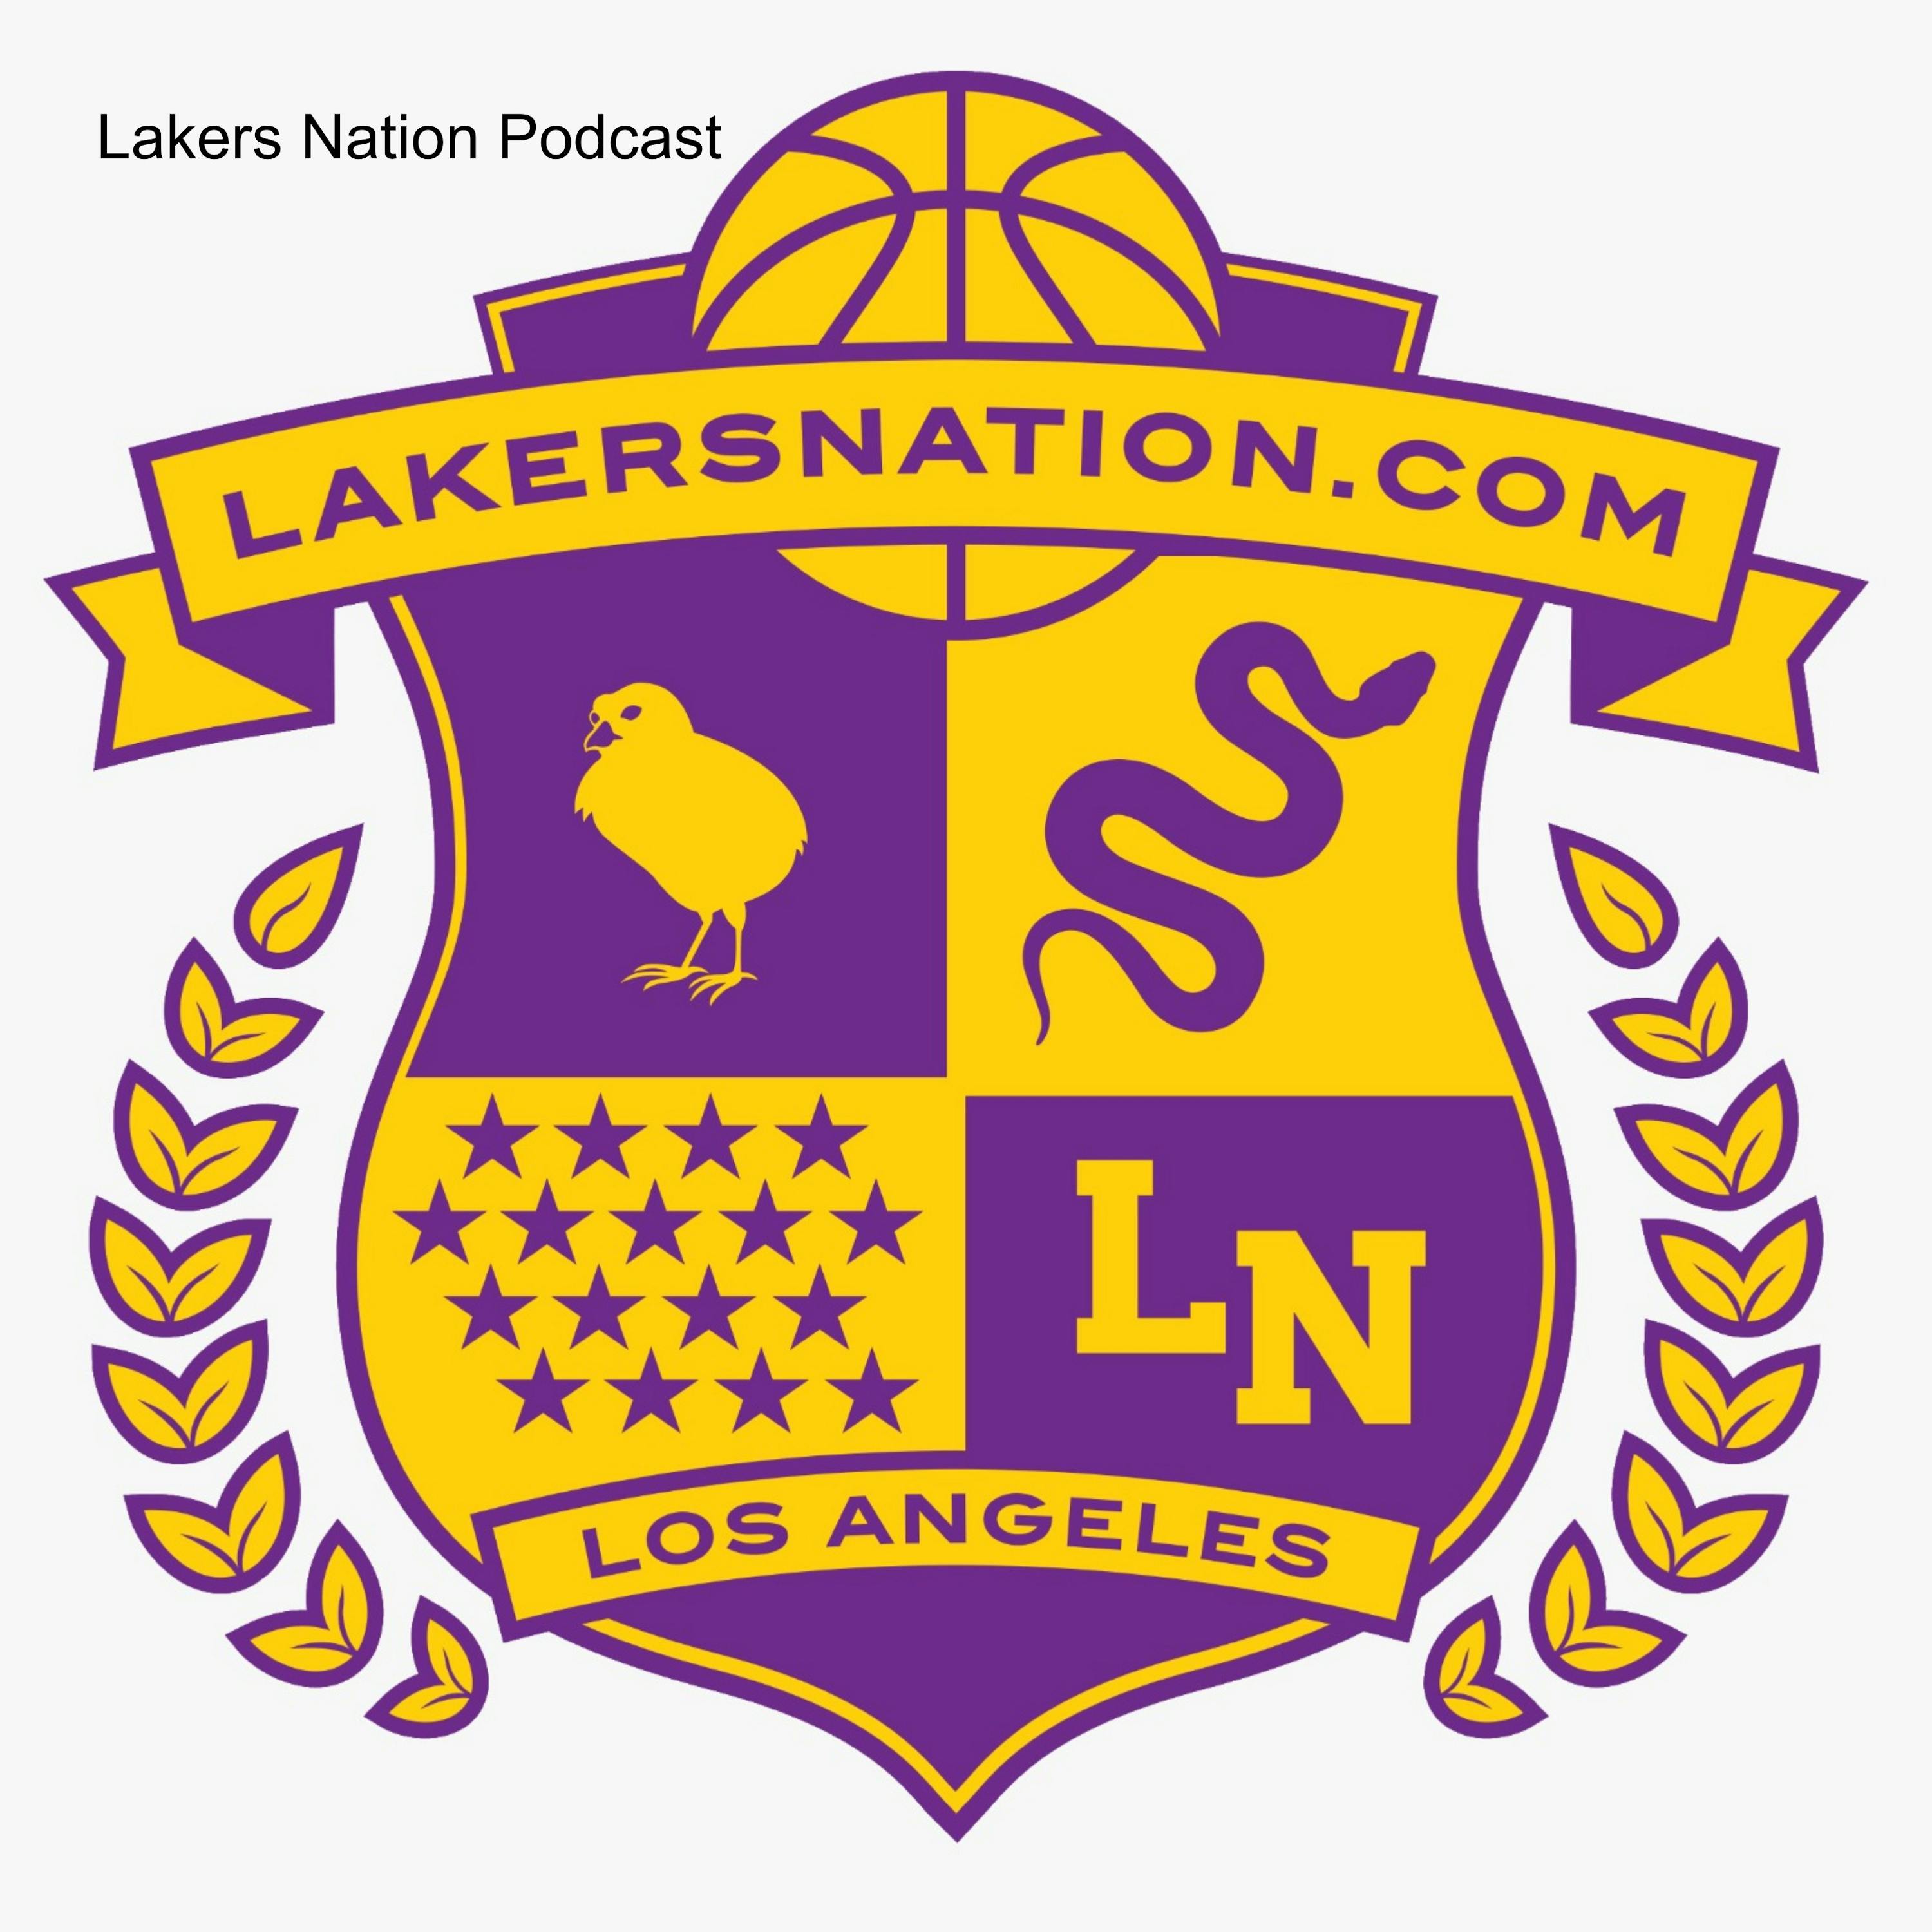 Lakers Nation Podcast:LakersNation.com